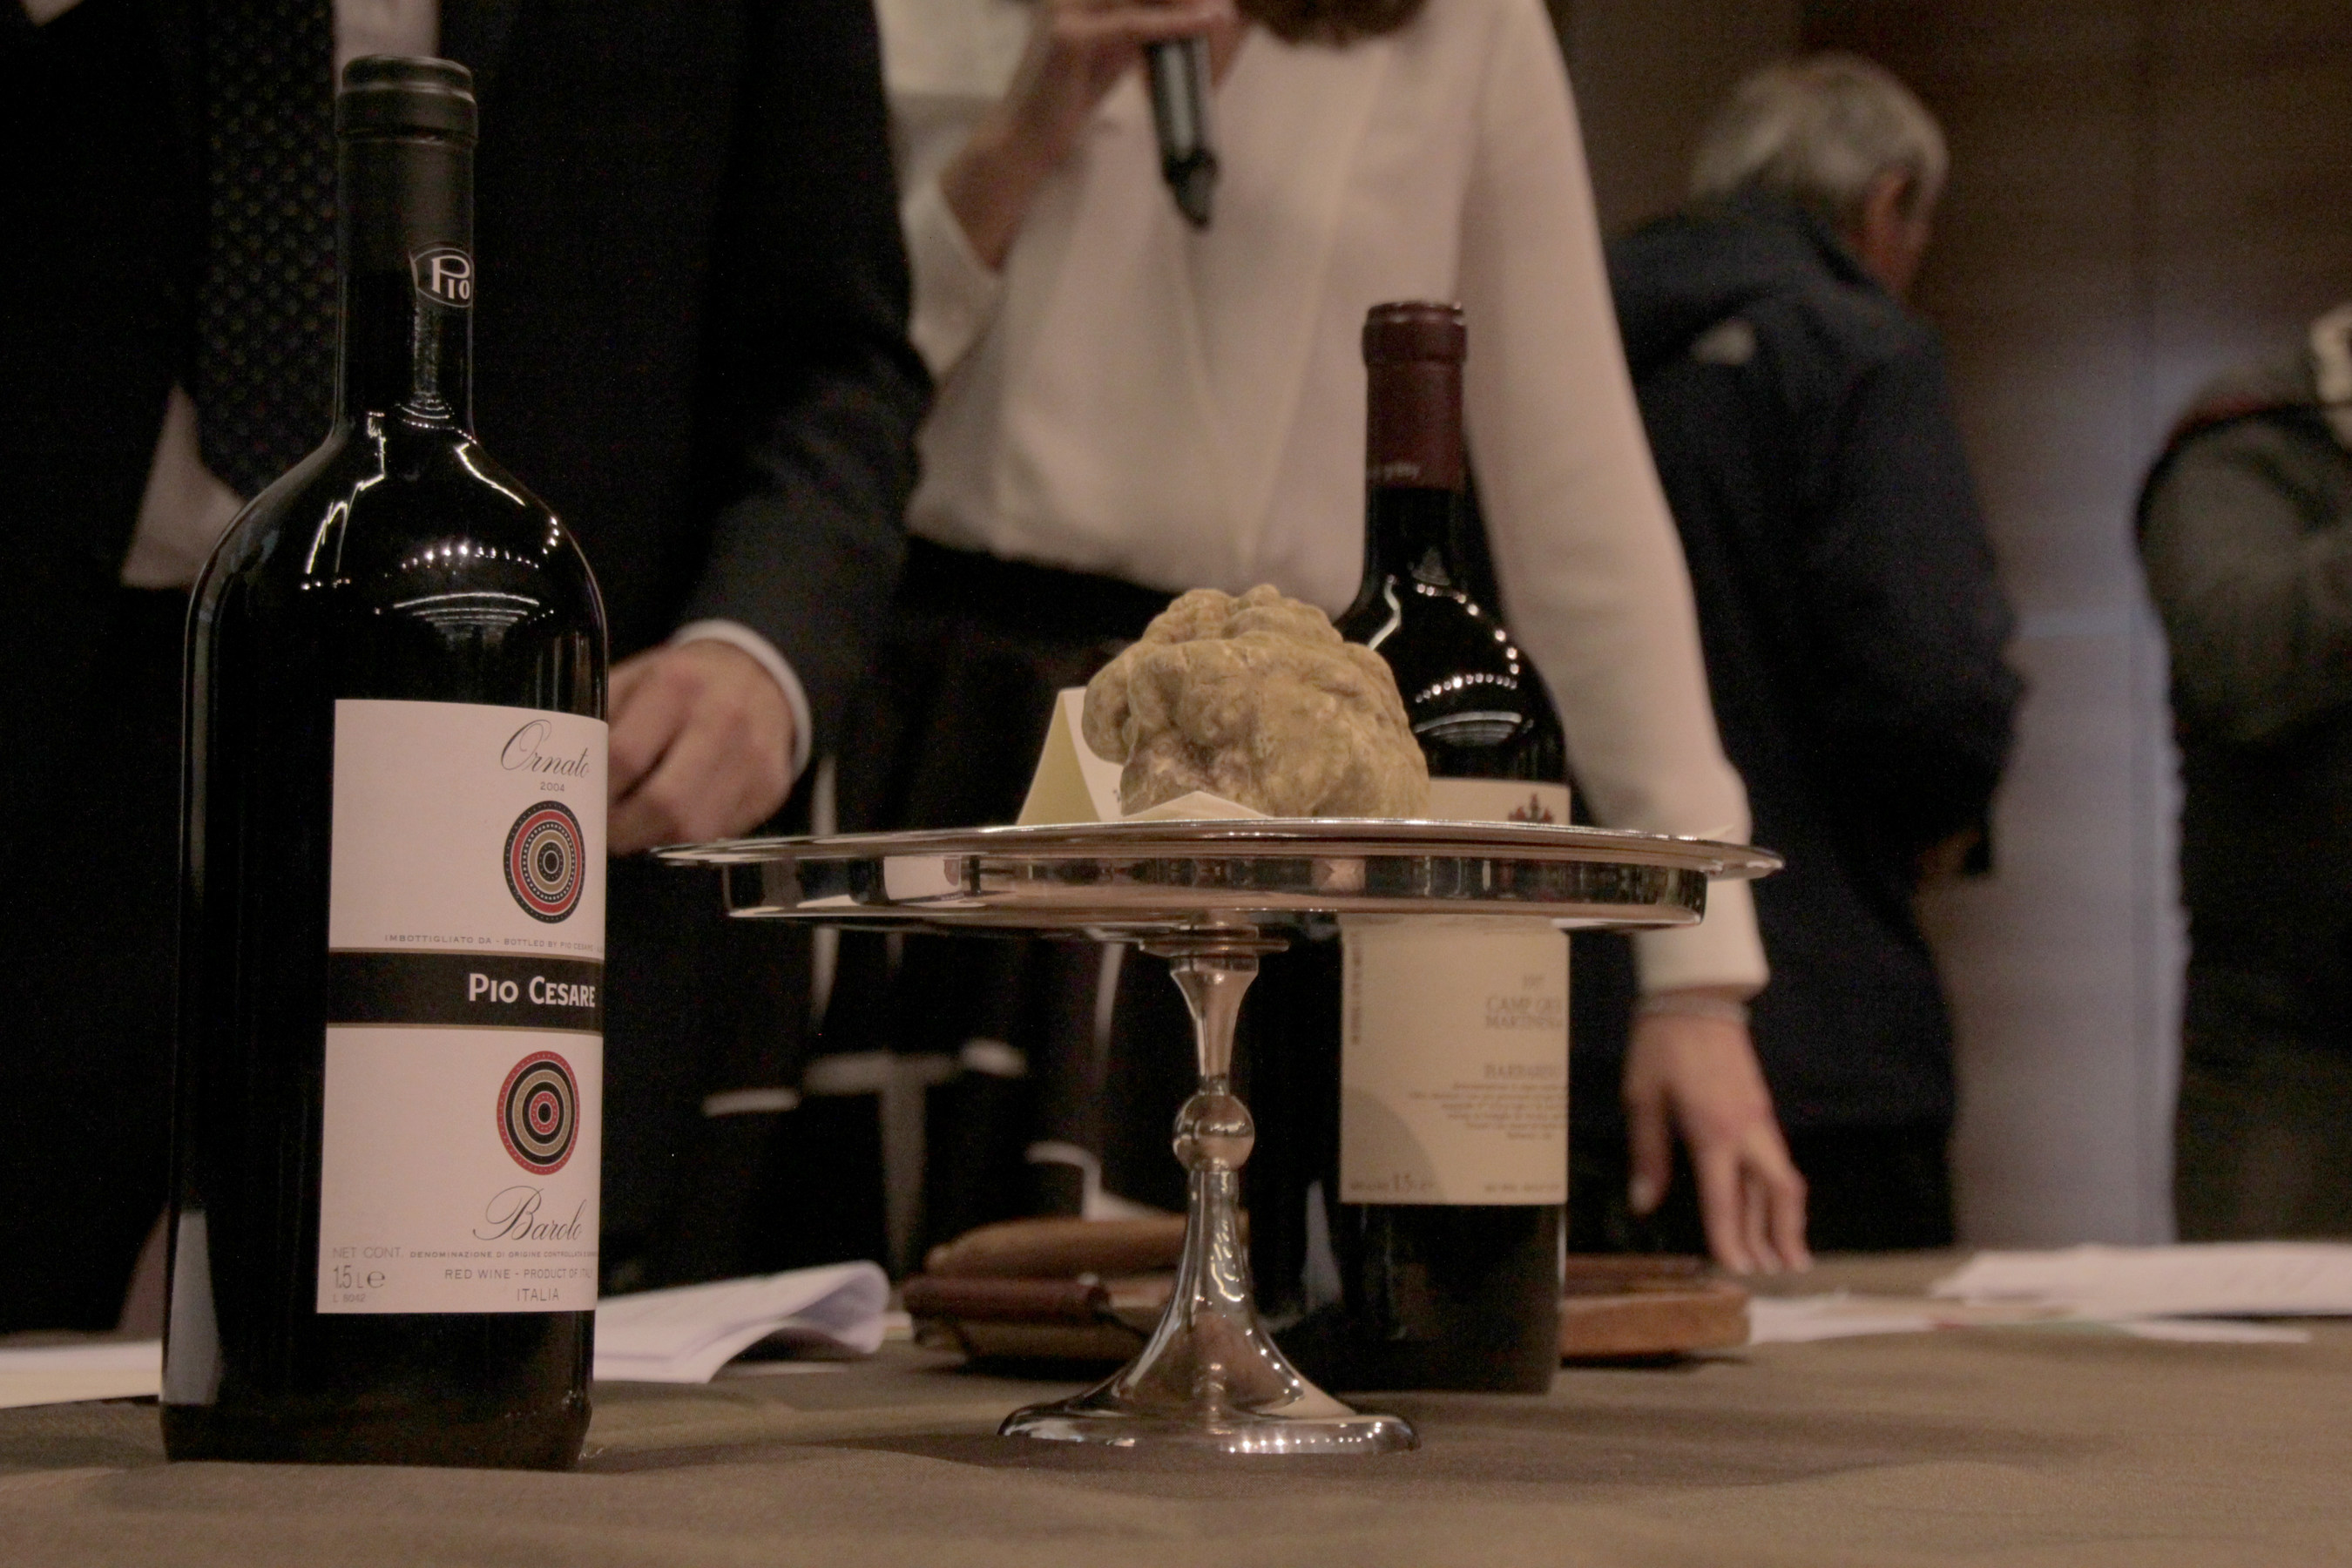 One of two winning lots for Celebrity Cruises at the World White Truffle Auction in Grinzane Cavour, Italy.